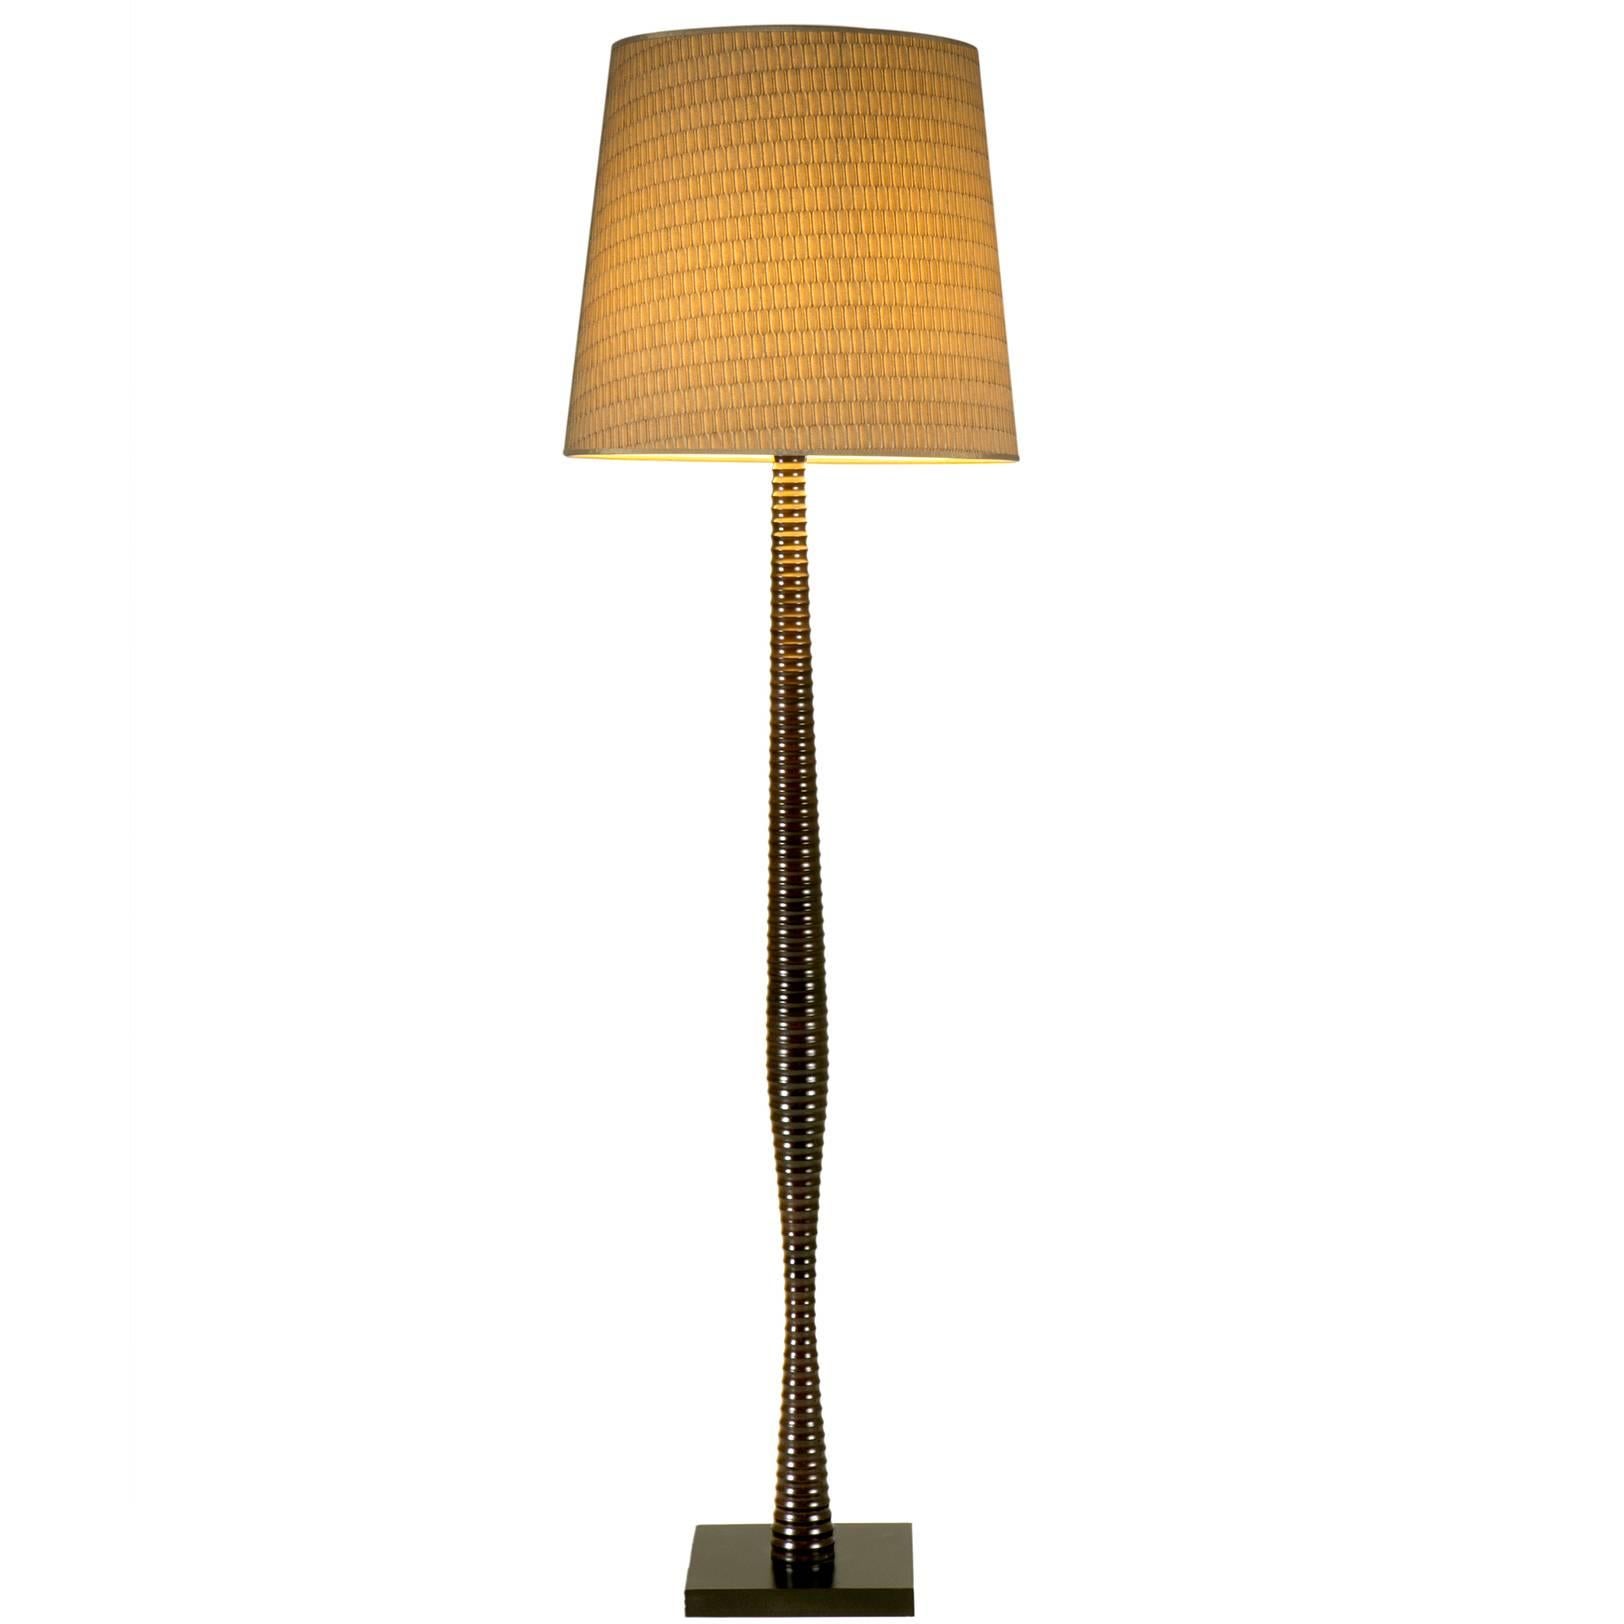 Pair of French Modern Turned Wood Floor Lamps with Beige Shade For Sale